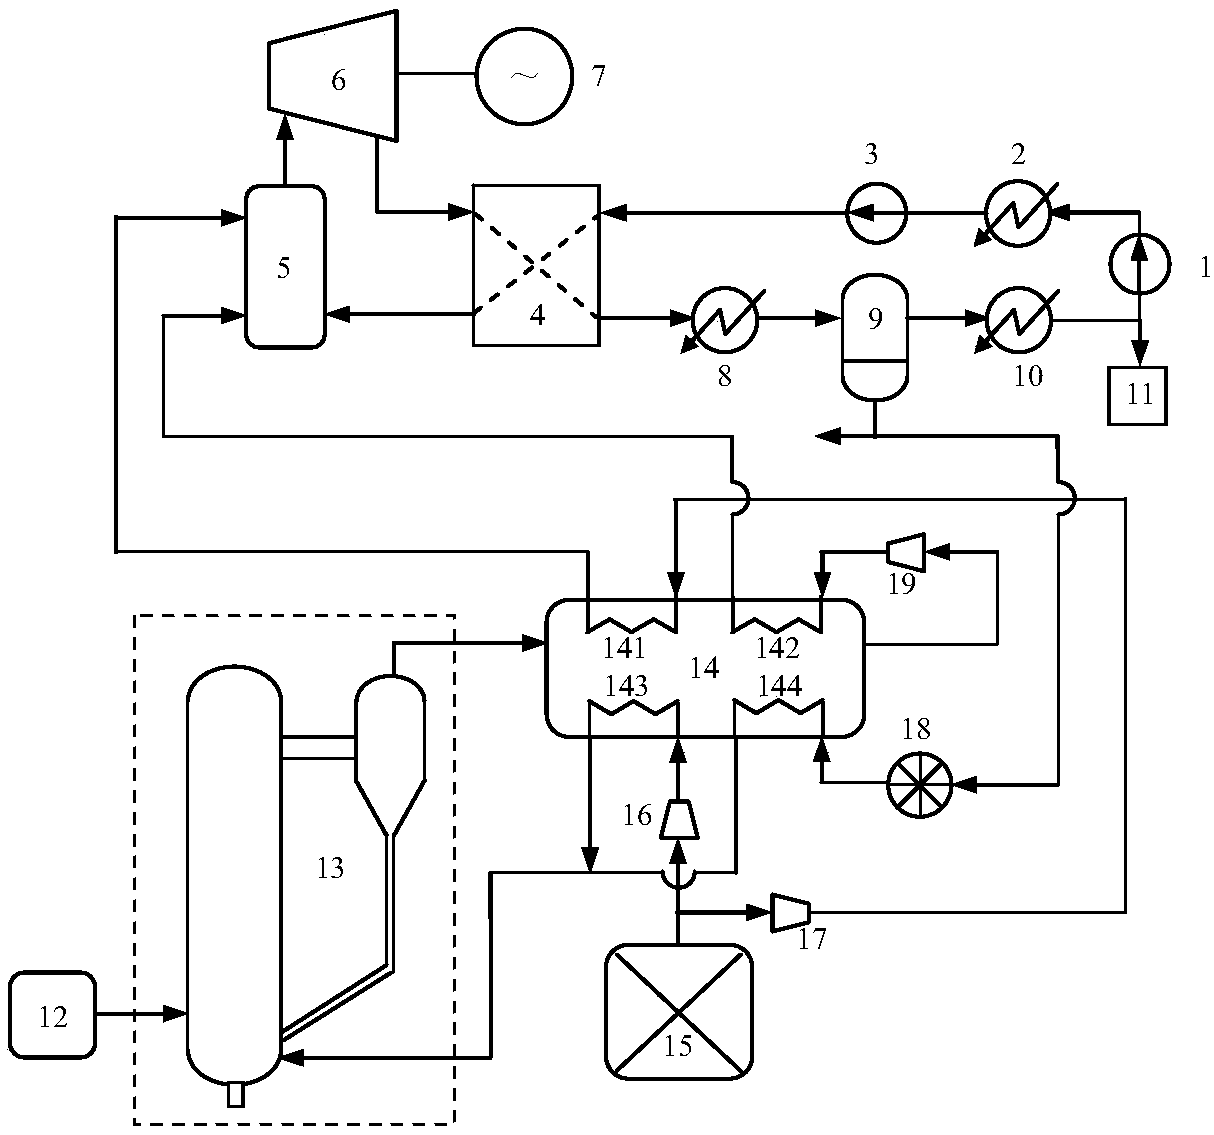 Biomass gasification power generation system and method